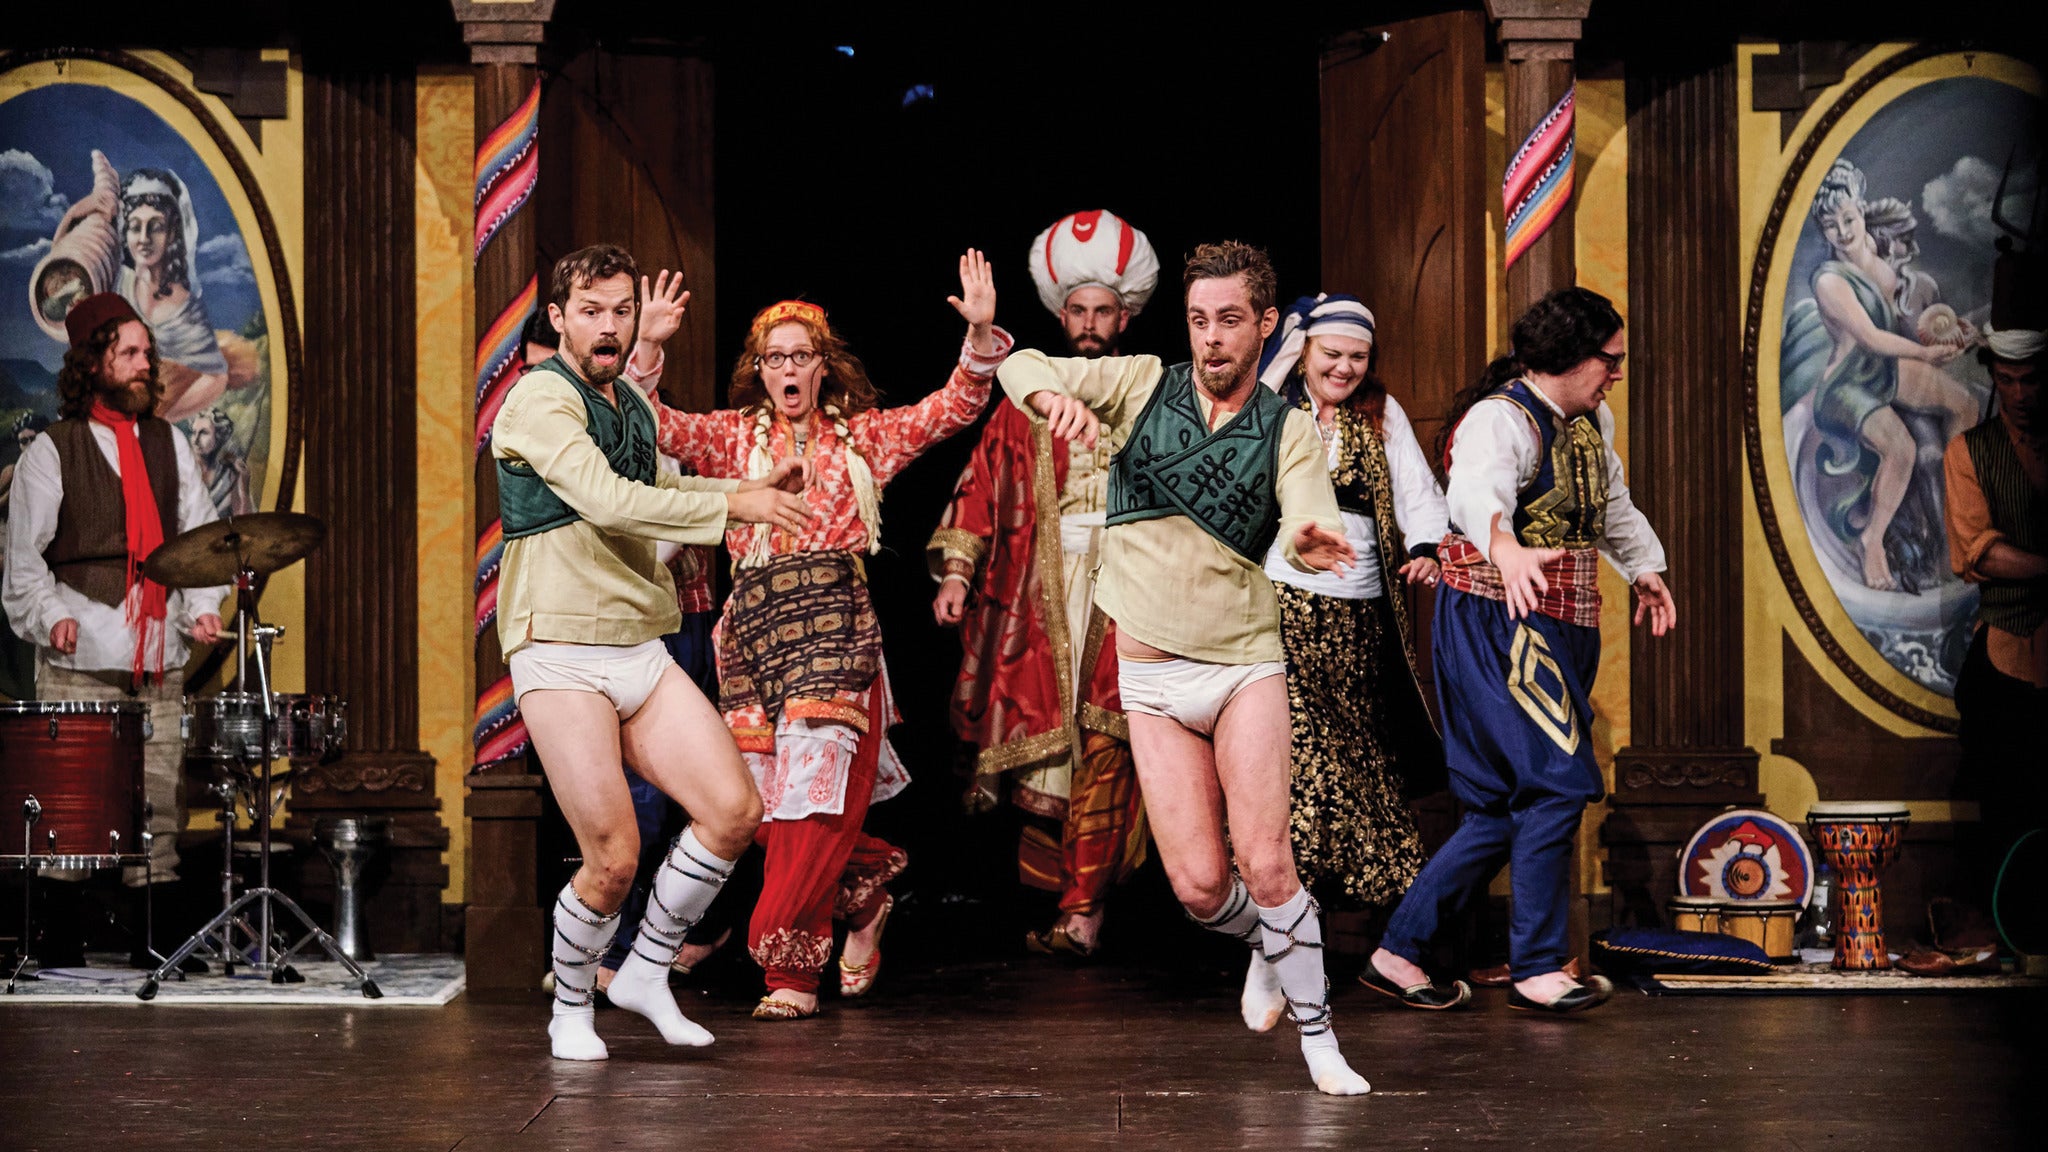 Image used with permission from Ticketmaster | Comedy of Errors tickets